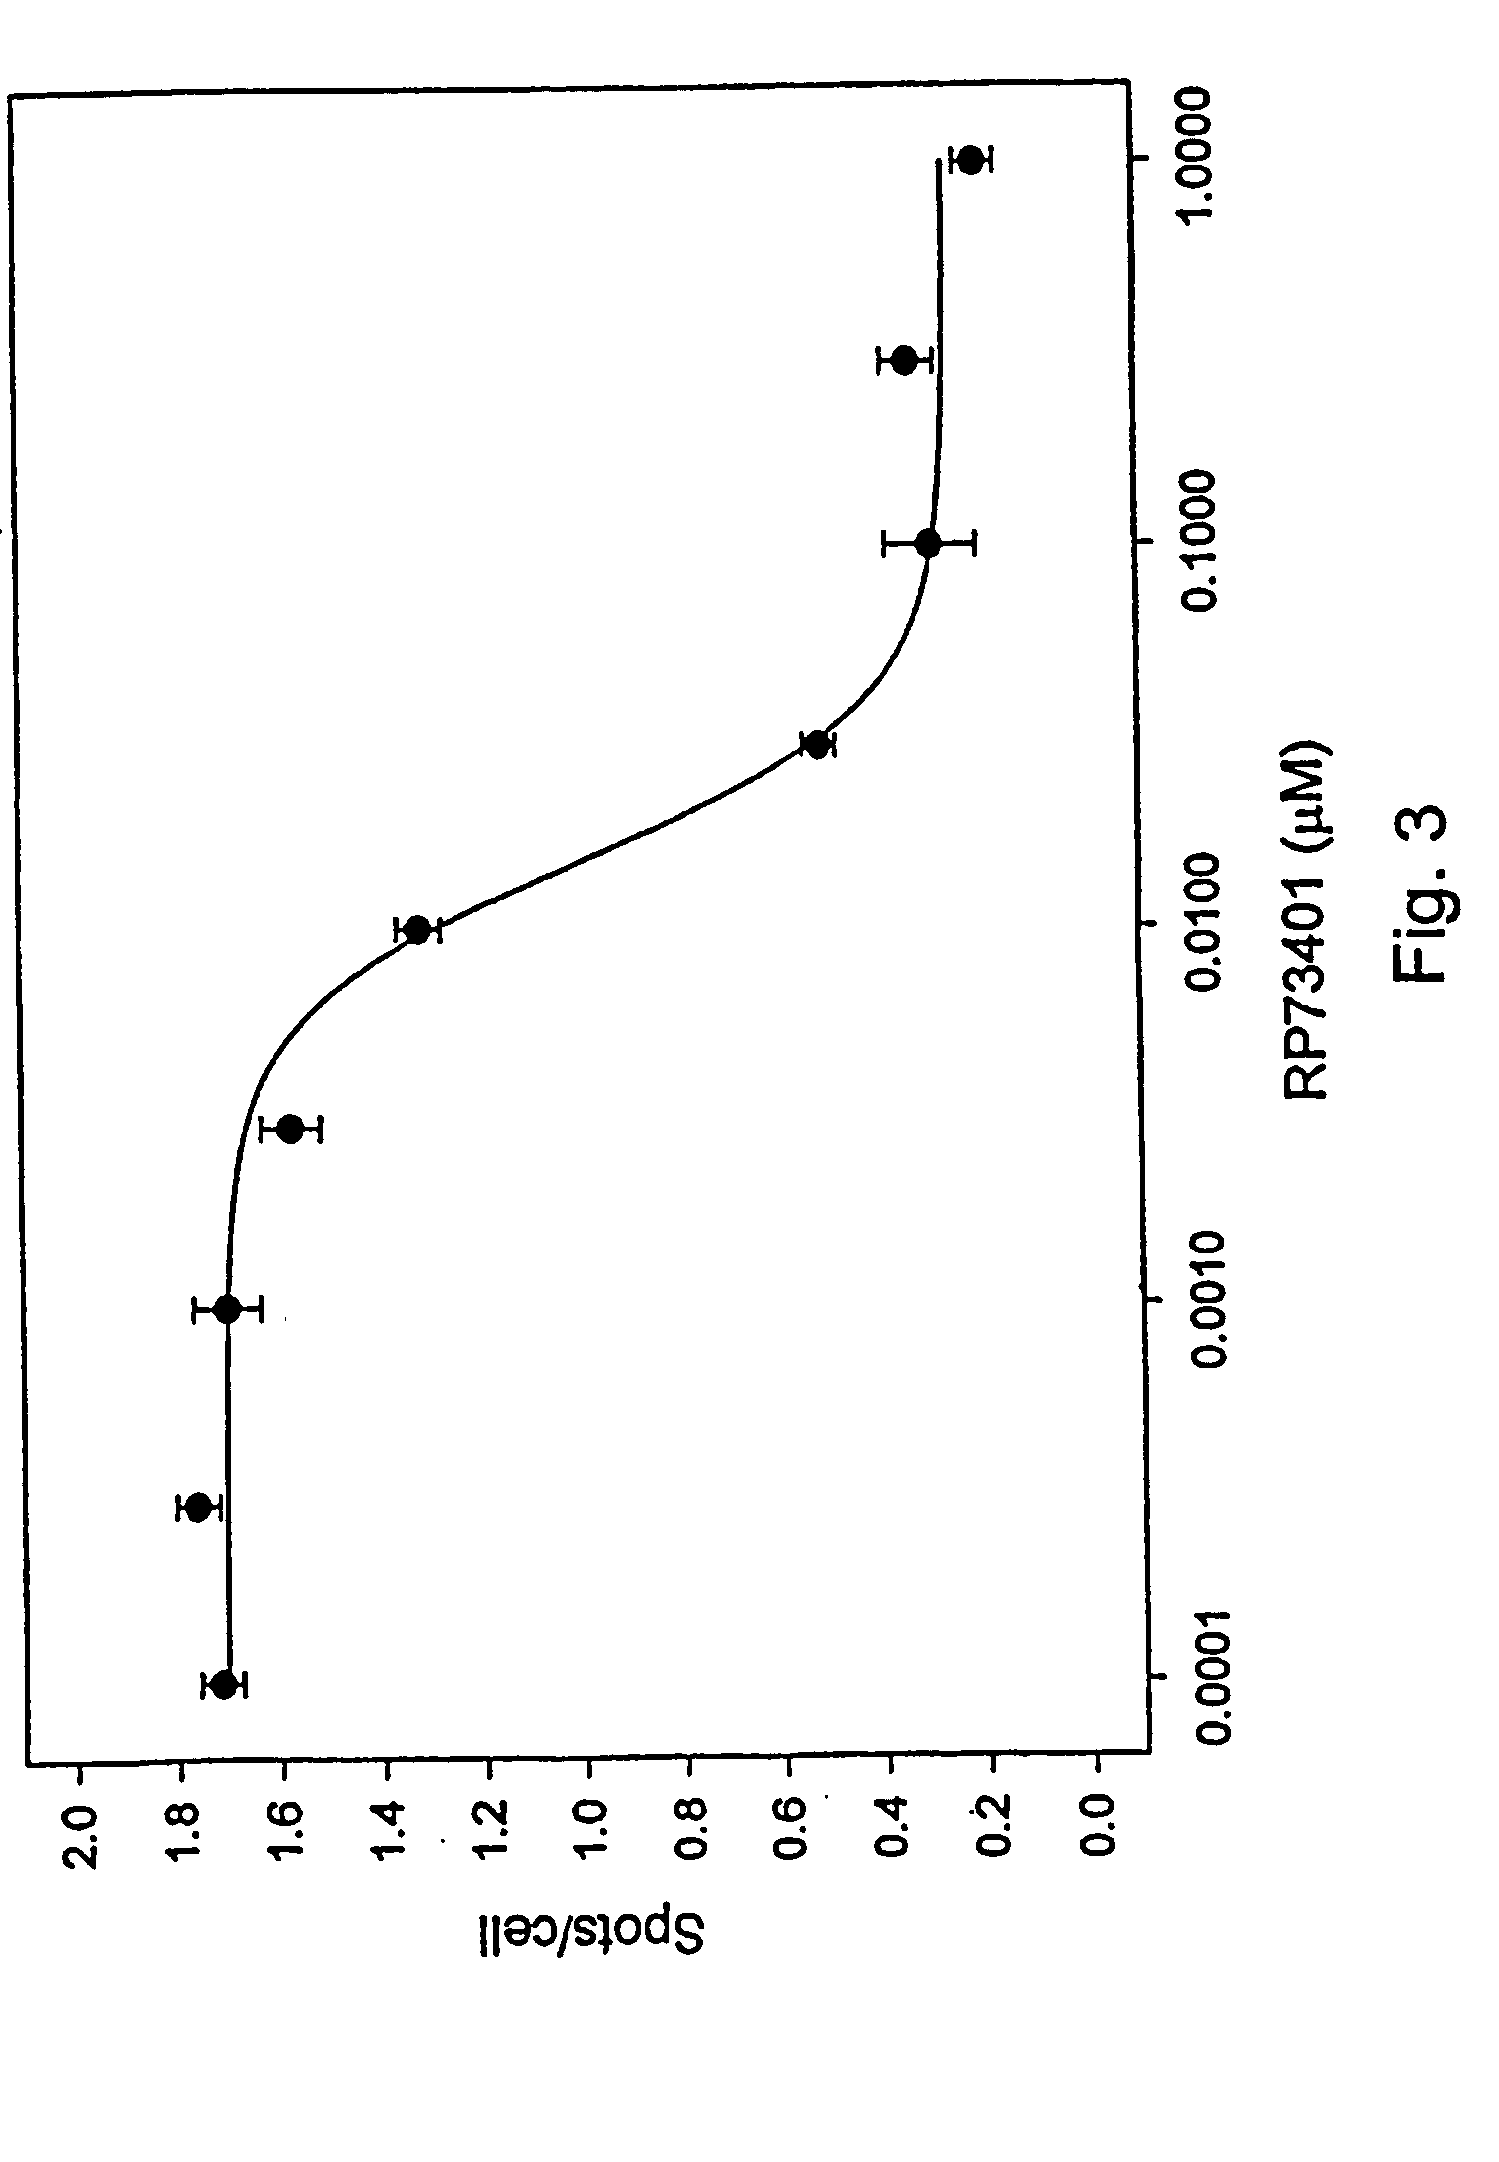 Method for extracting quantitative information relating to interactions between cellular components